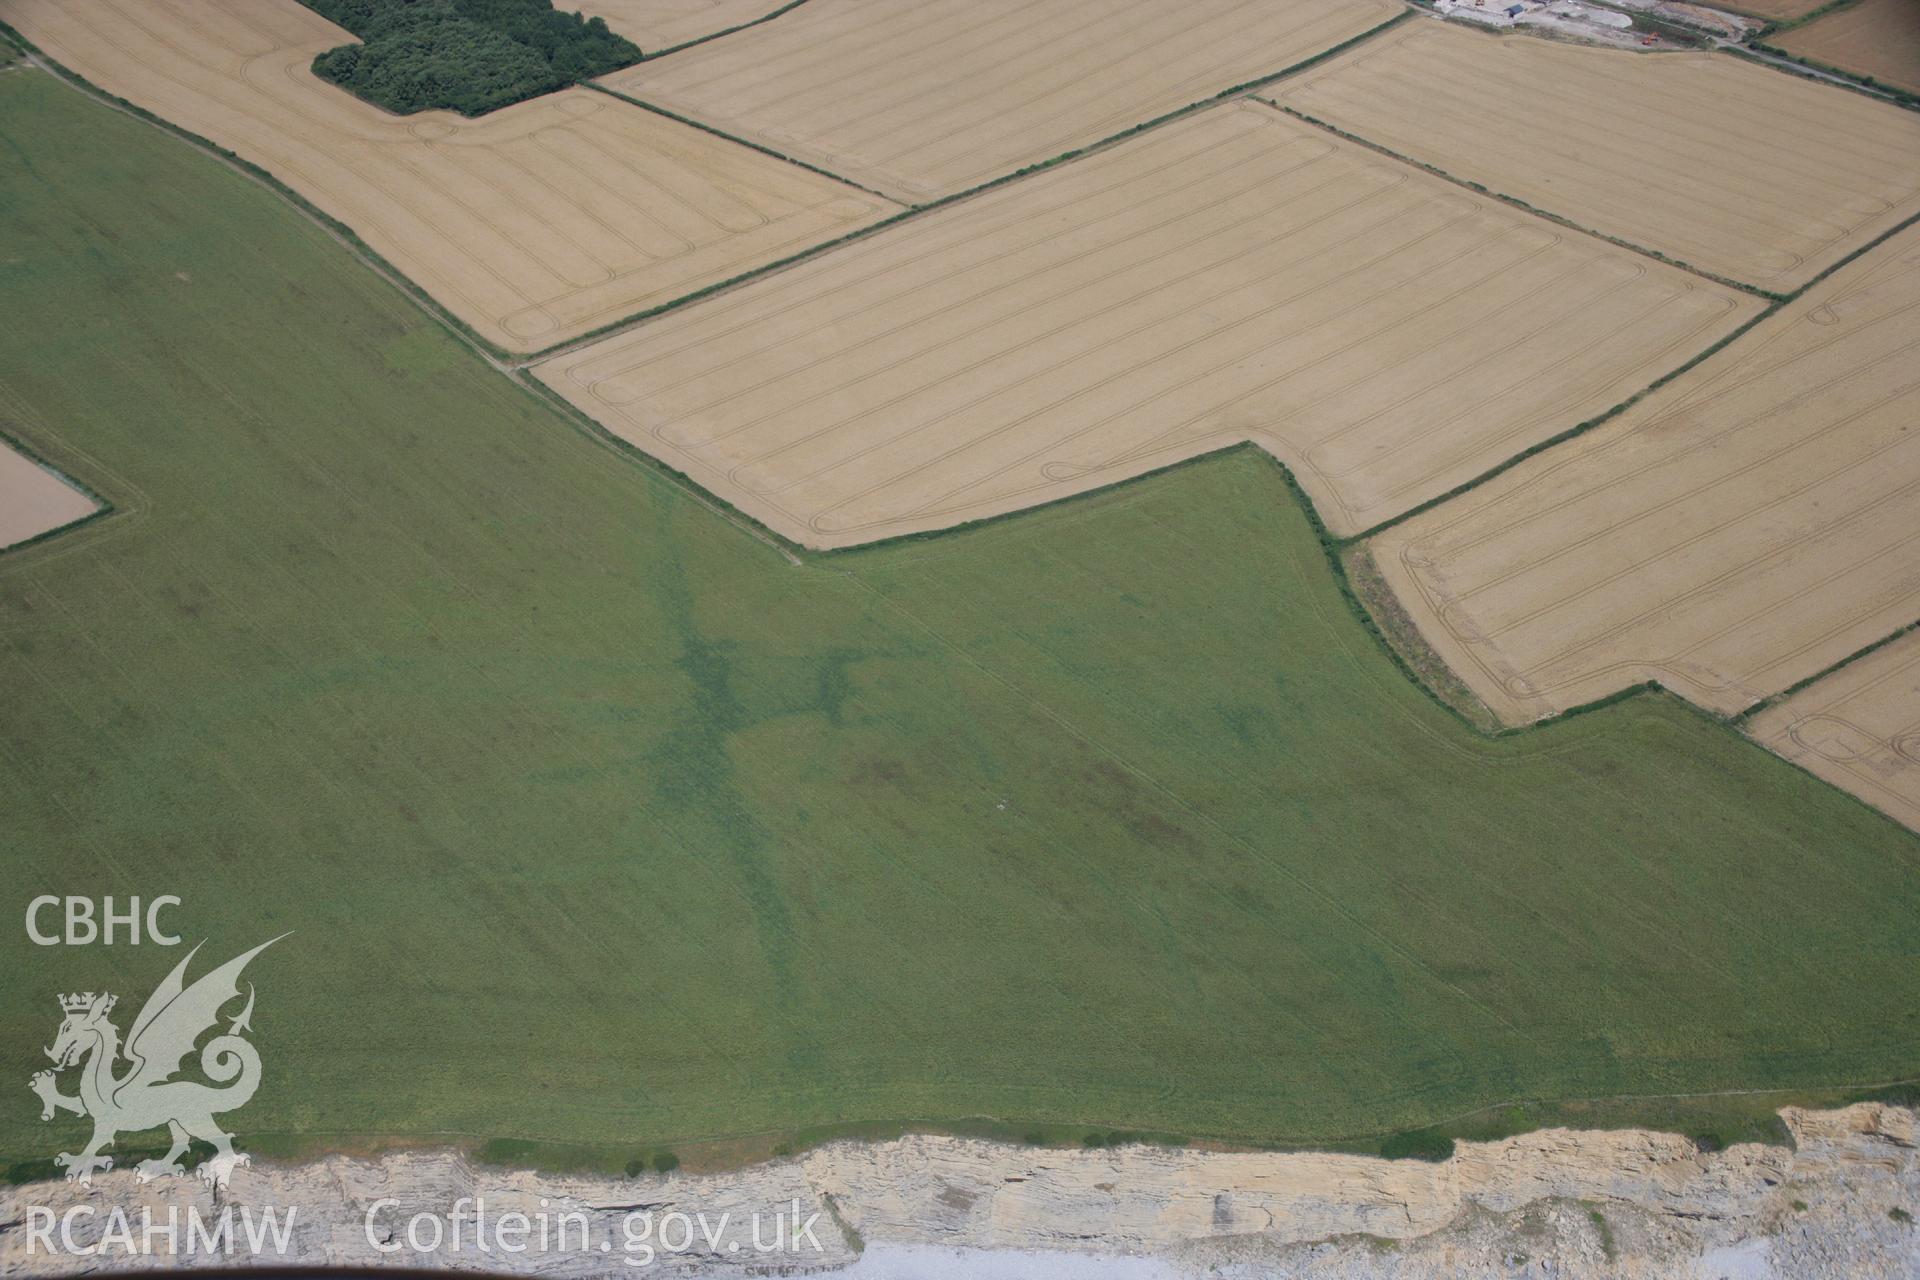 RCAHMW colour oblique aerial photograph of non-archaeological cropmarks. Taken on 24 July 2006 by Toby Driver